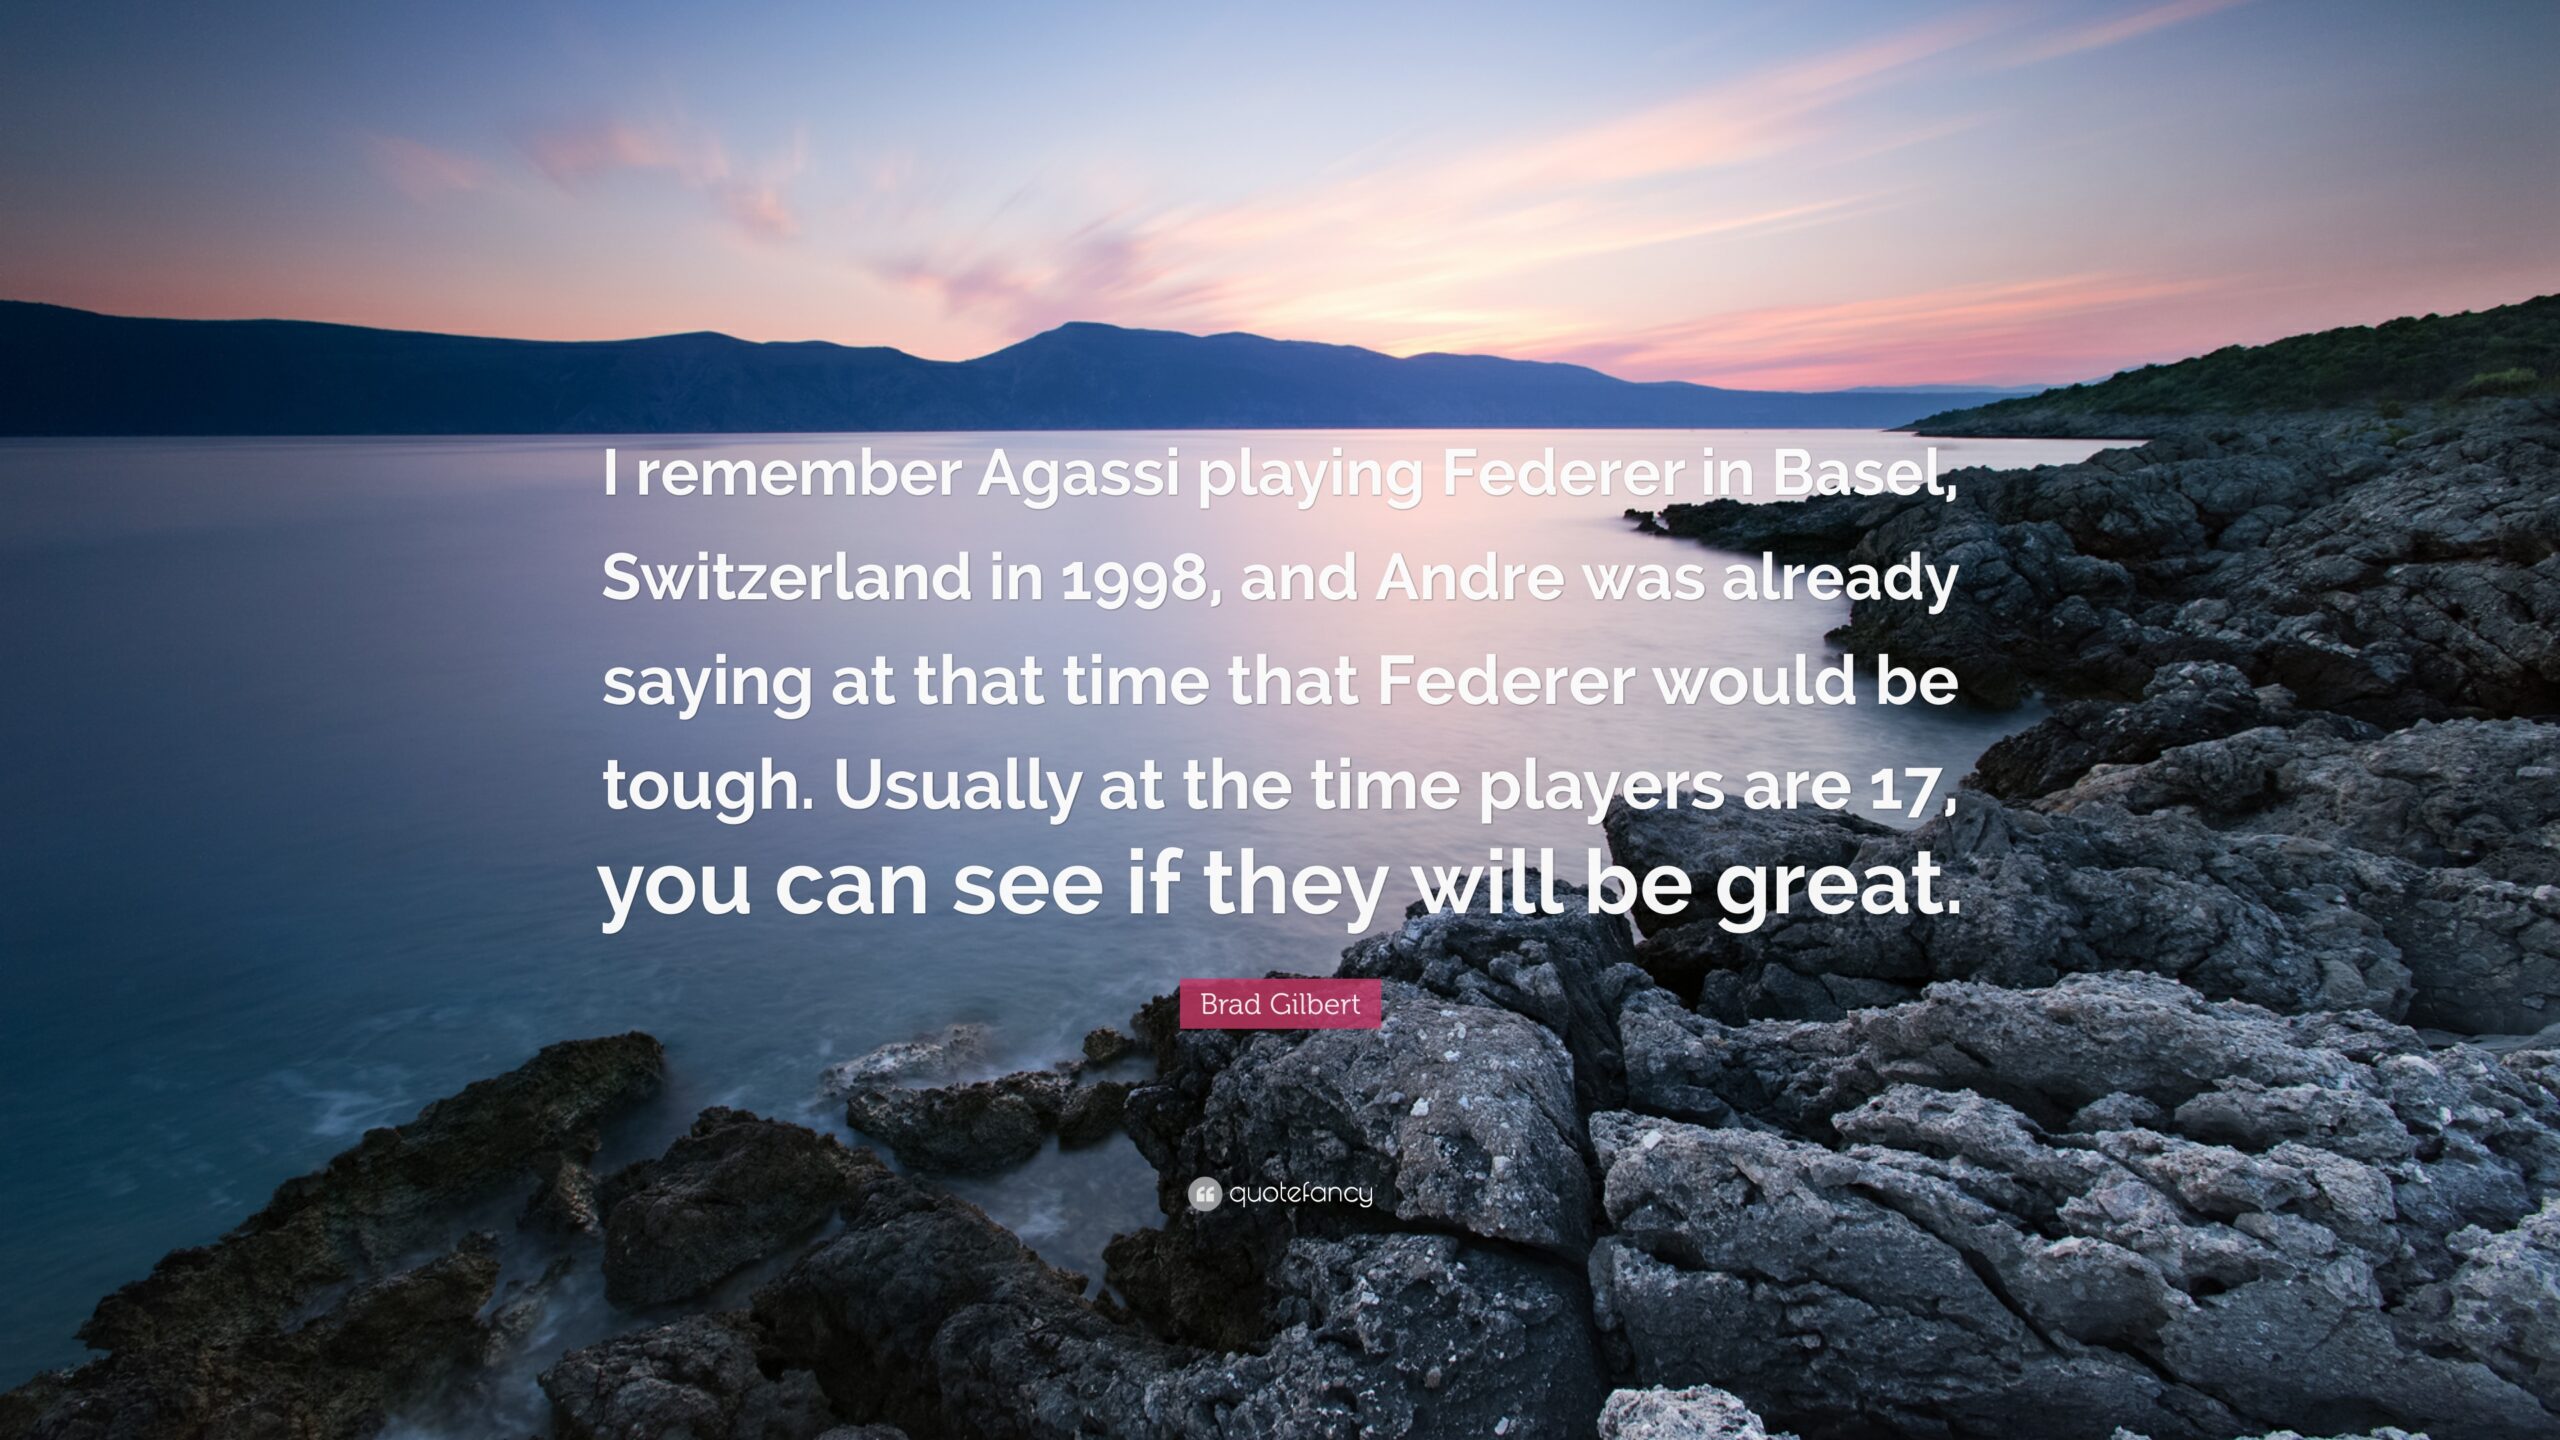 Brad Gilbert Quote “I remember Agassi playing Federer in Basel